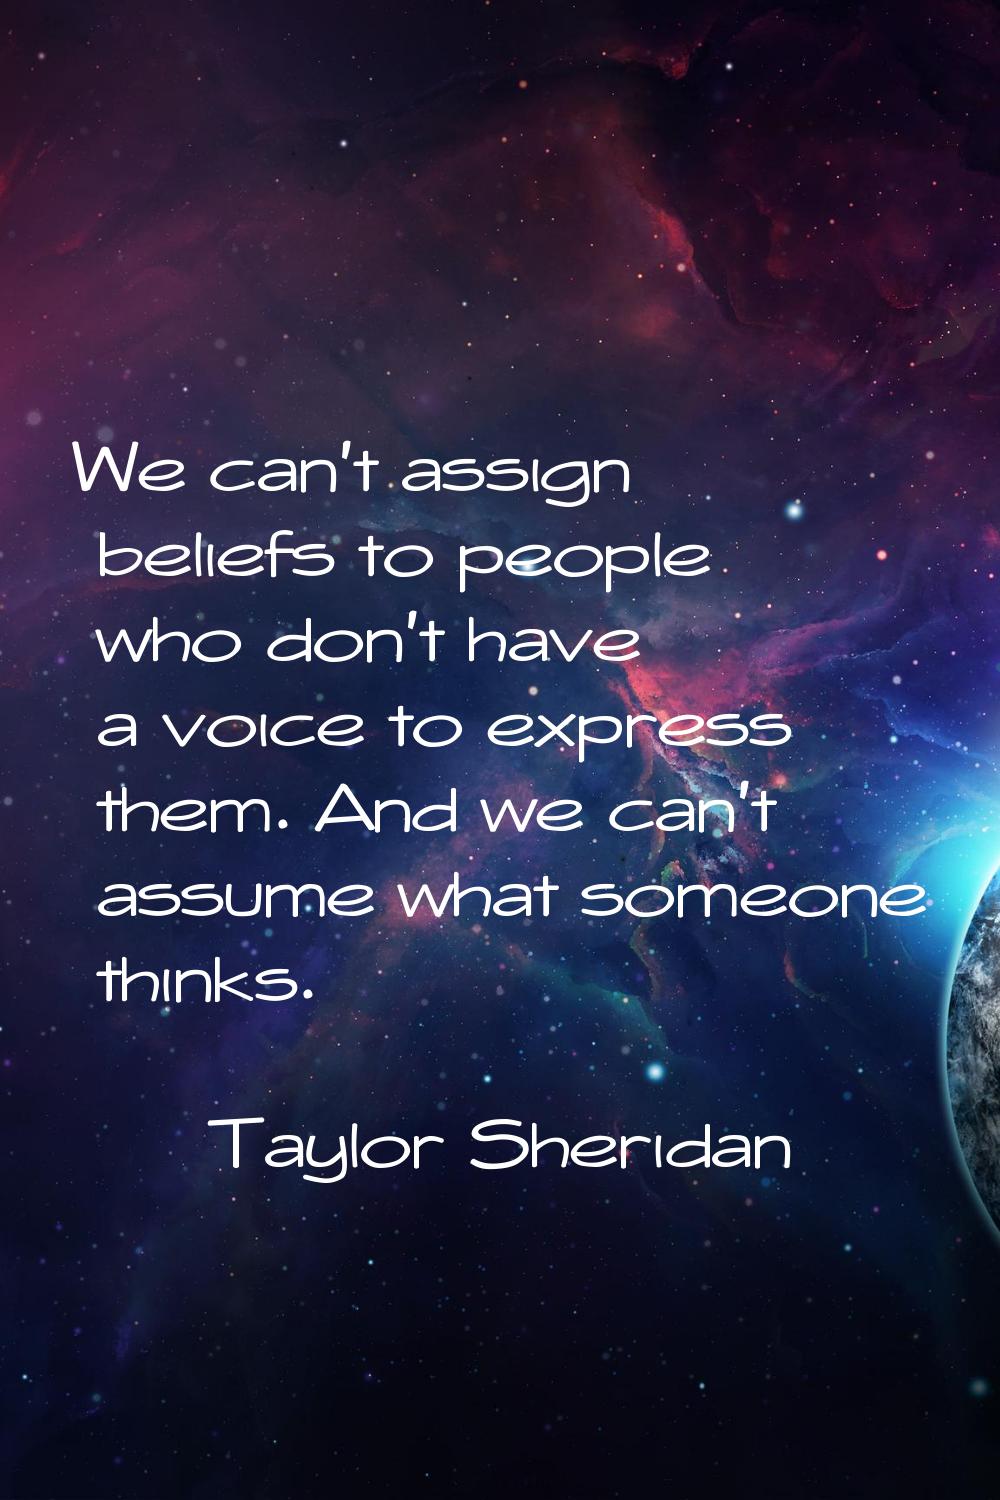 We can't assign beliefs to people who don't have a voice to express them. And we can't assume what 